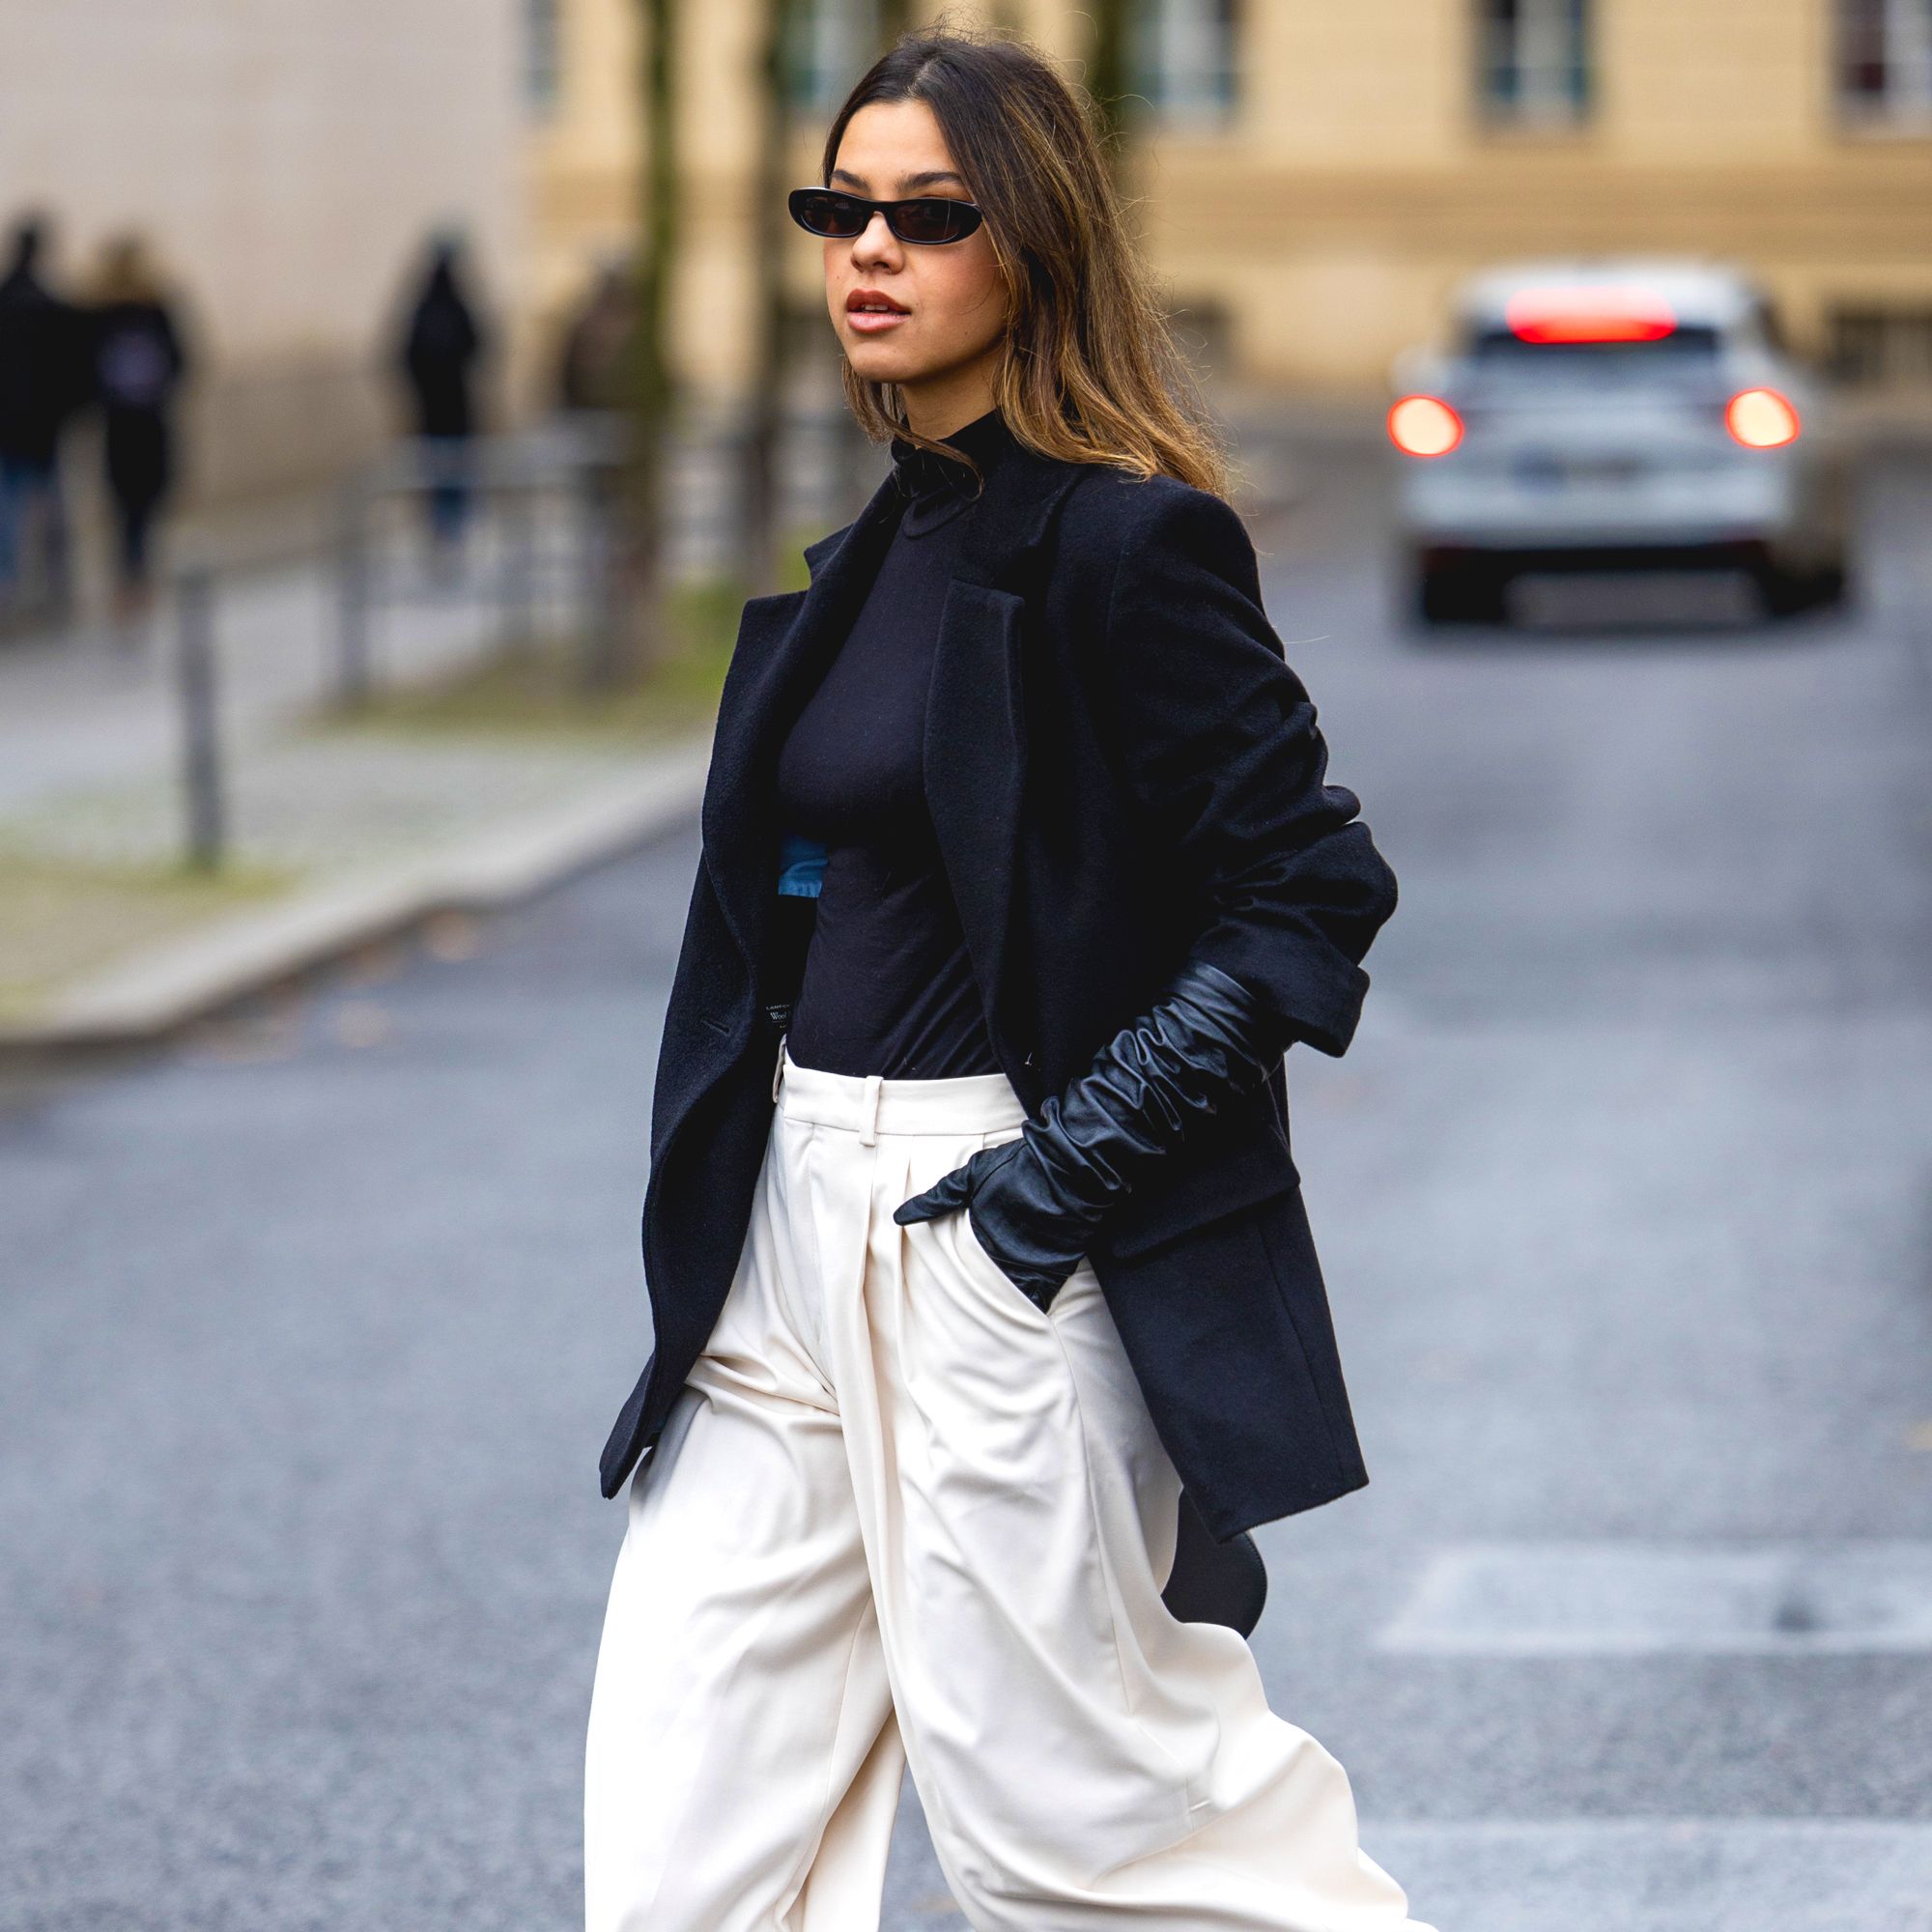 30+Winter Outfit Ideas That Are Easy to Repeat